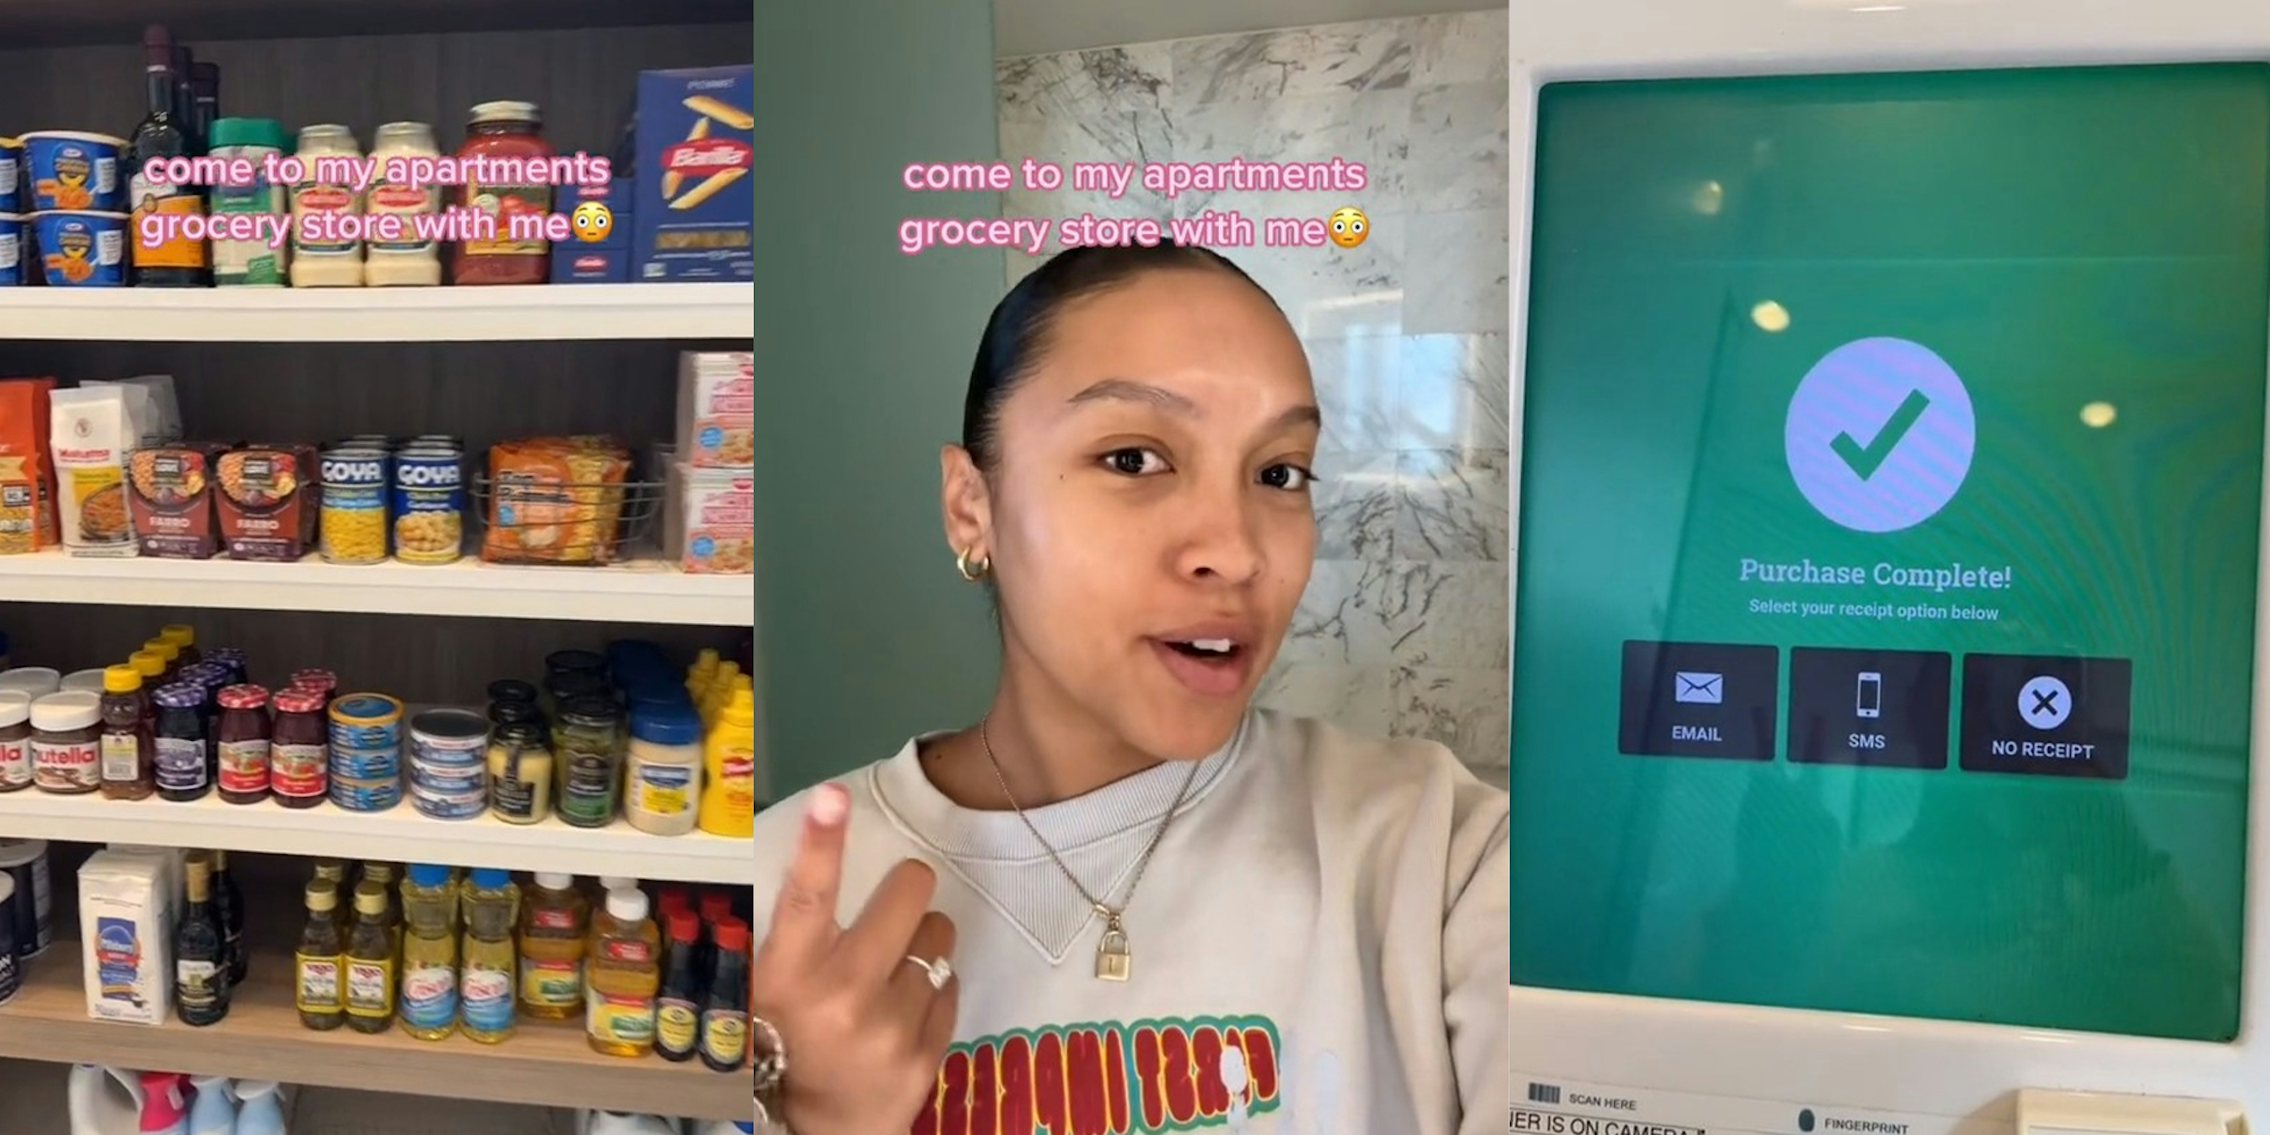 Woman shares apartment’s grocery store